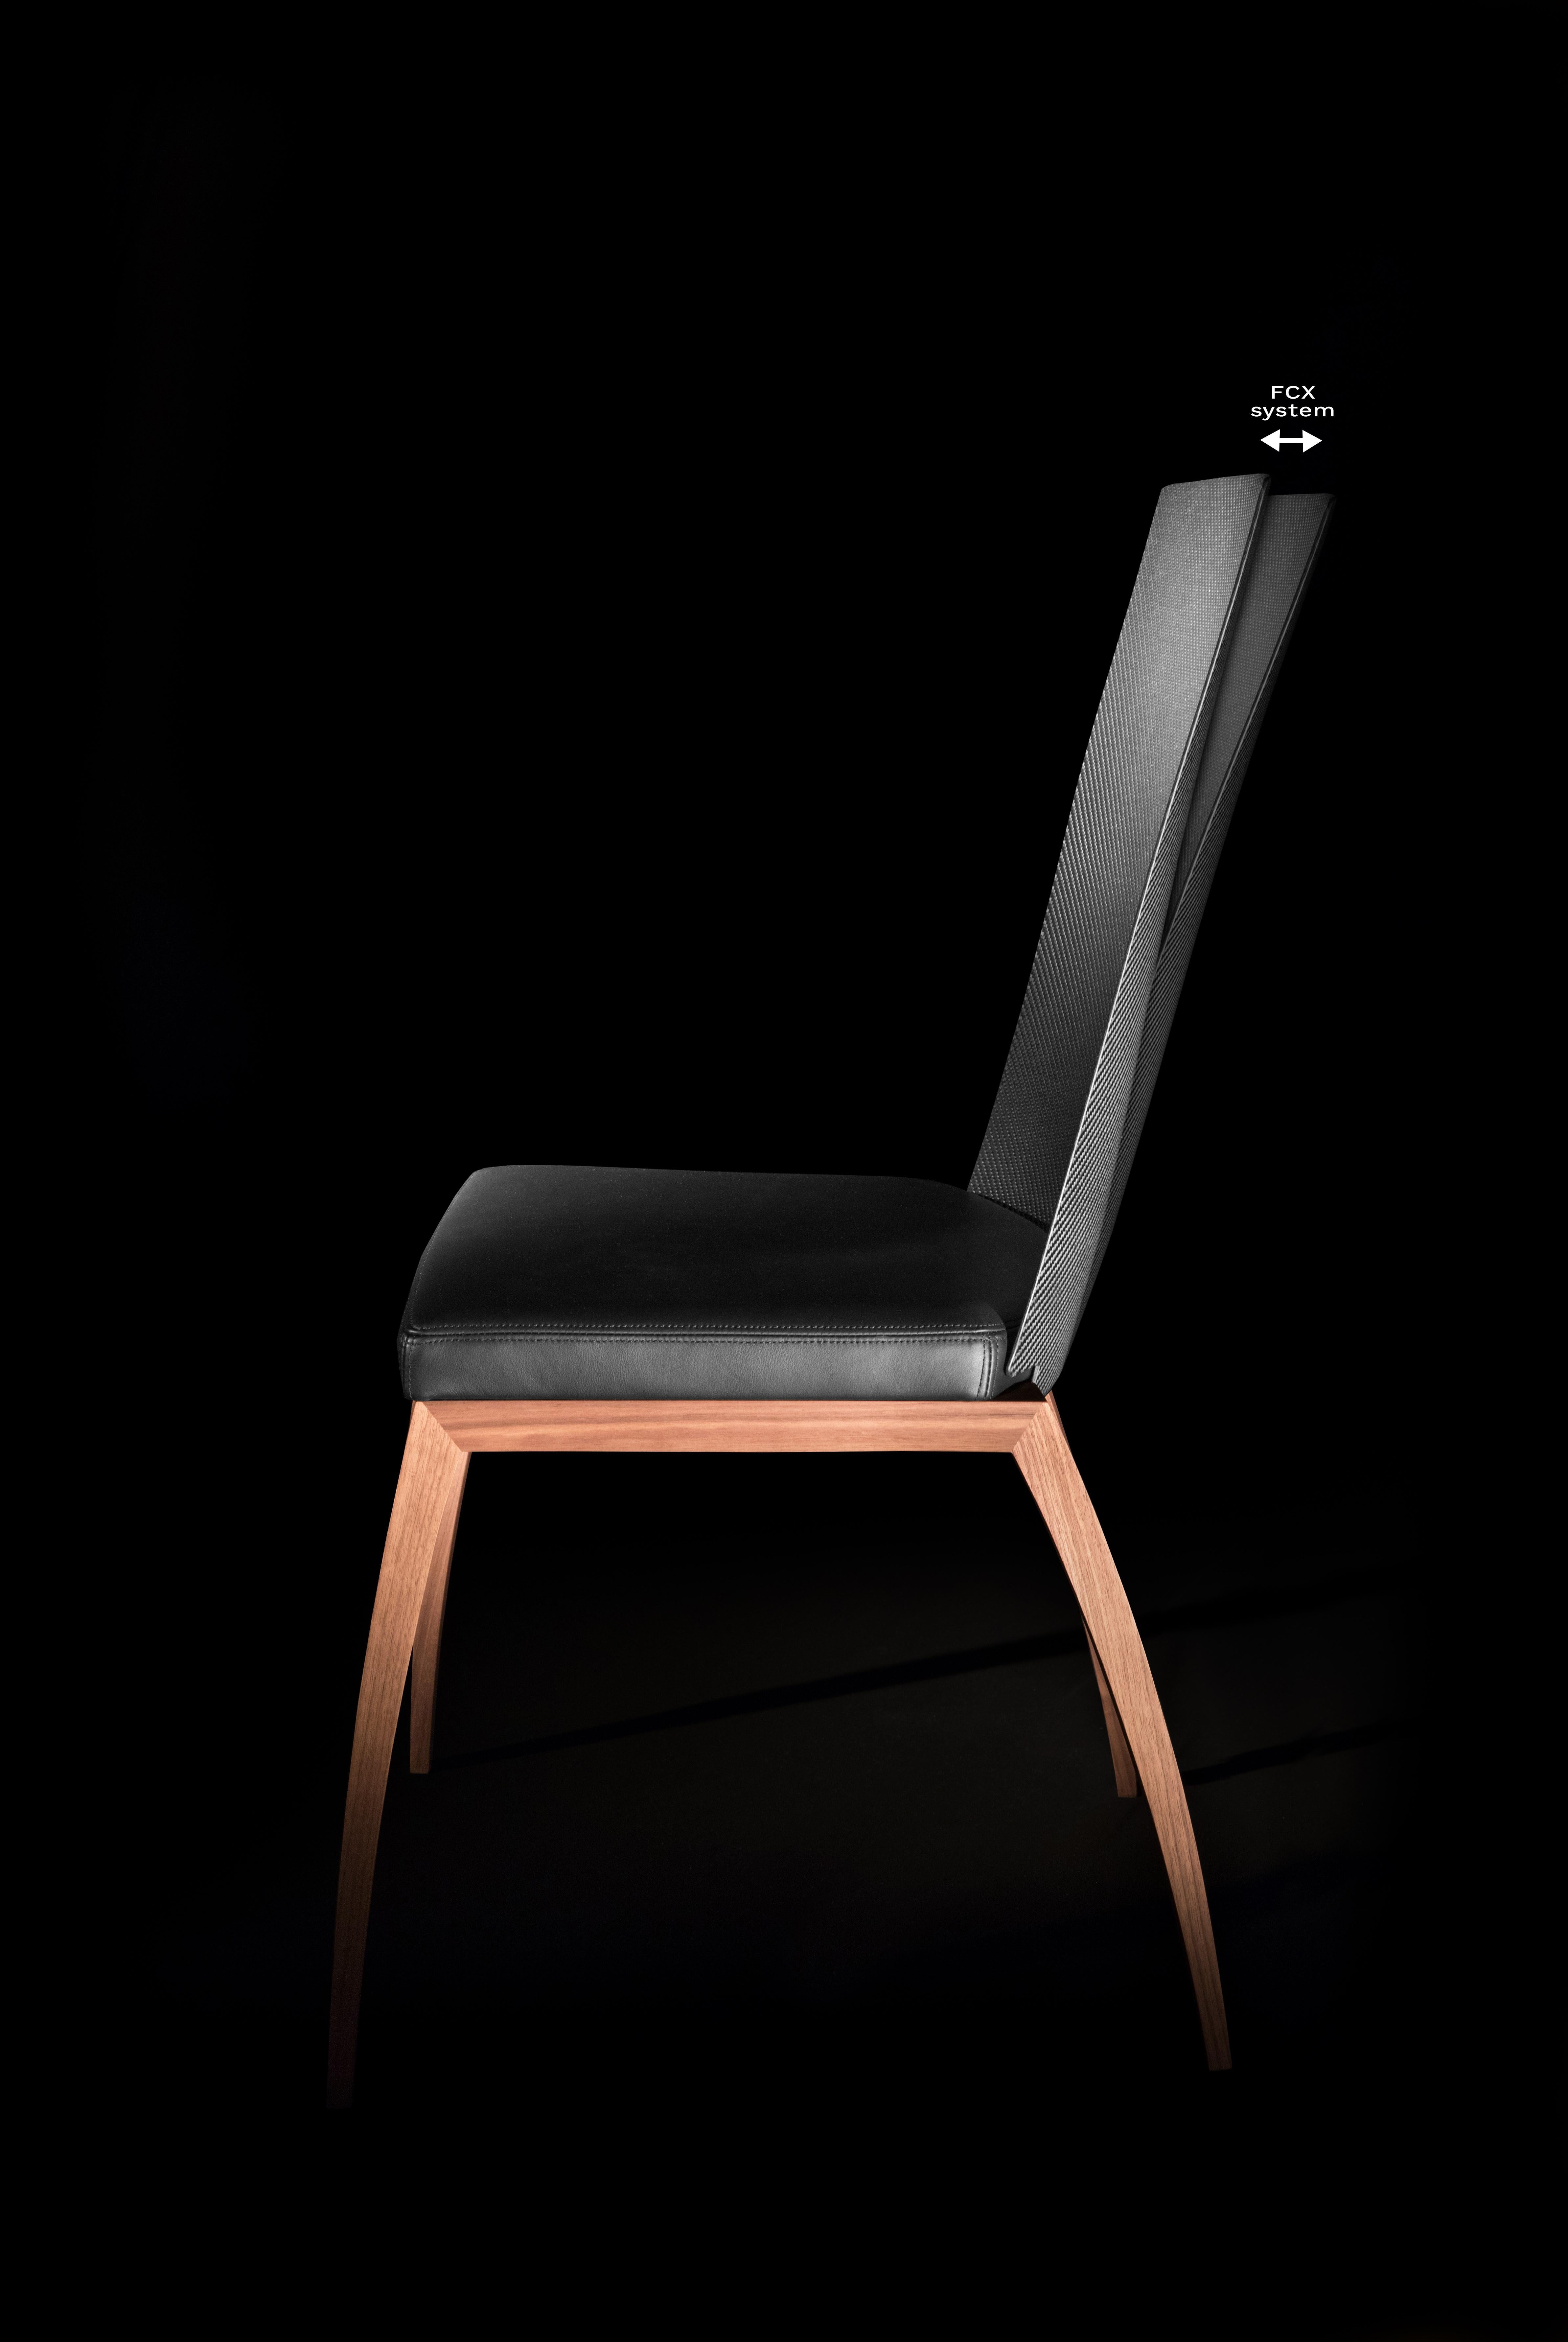 Laminated Modern Design Chair with Armrests, Made in Canaletto Walnut and Carbon Fiber For Sale